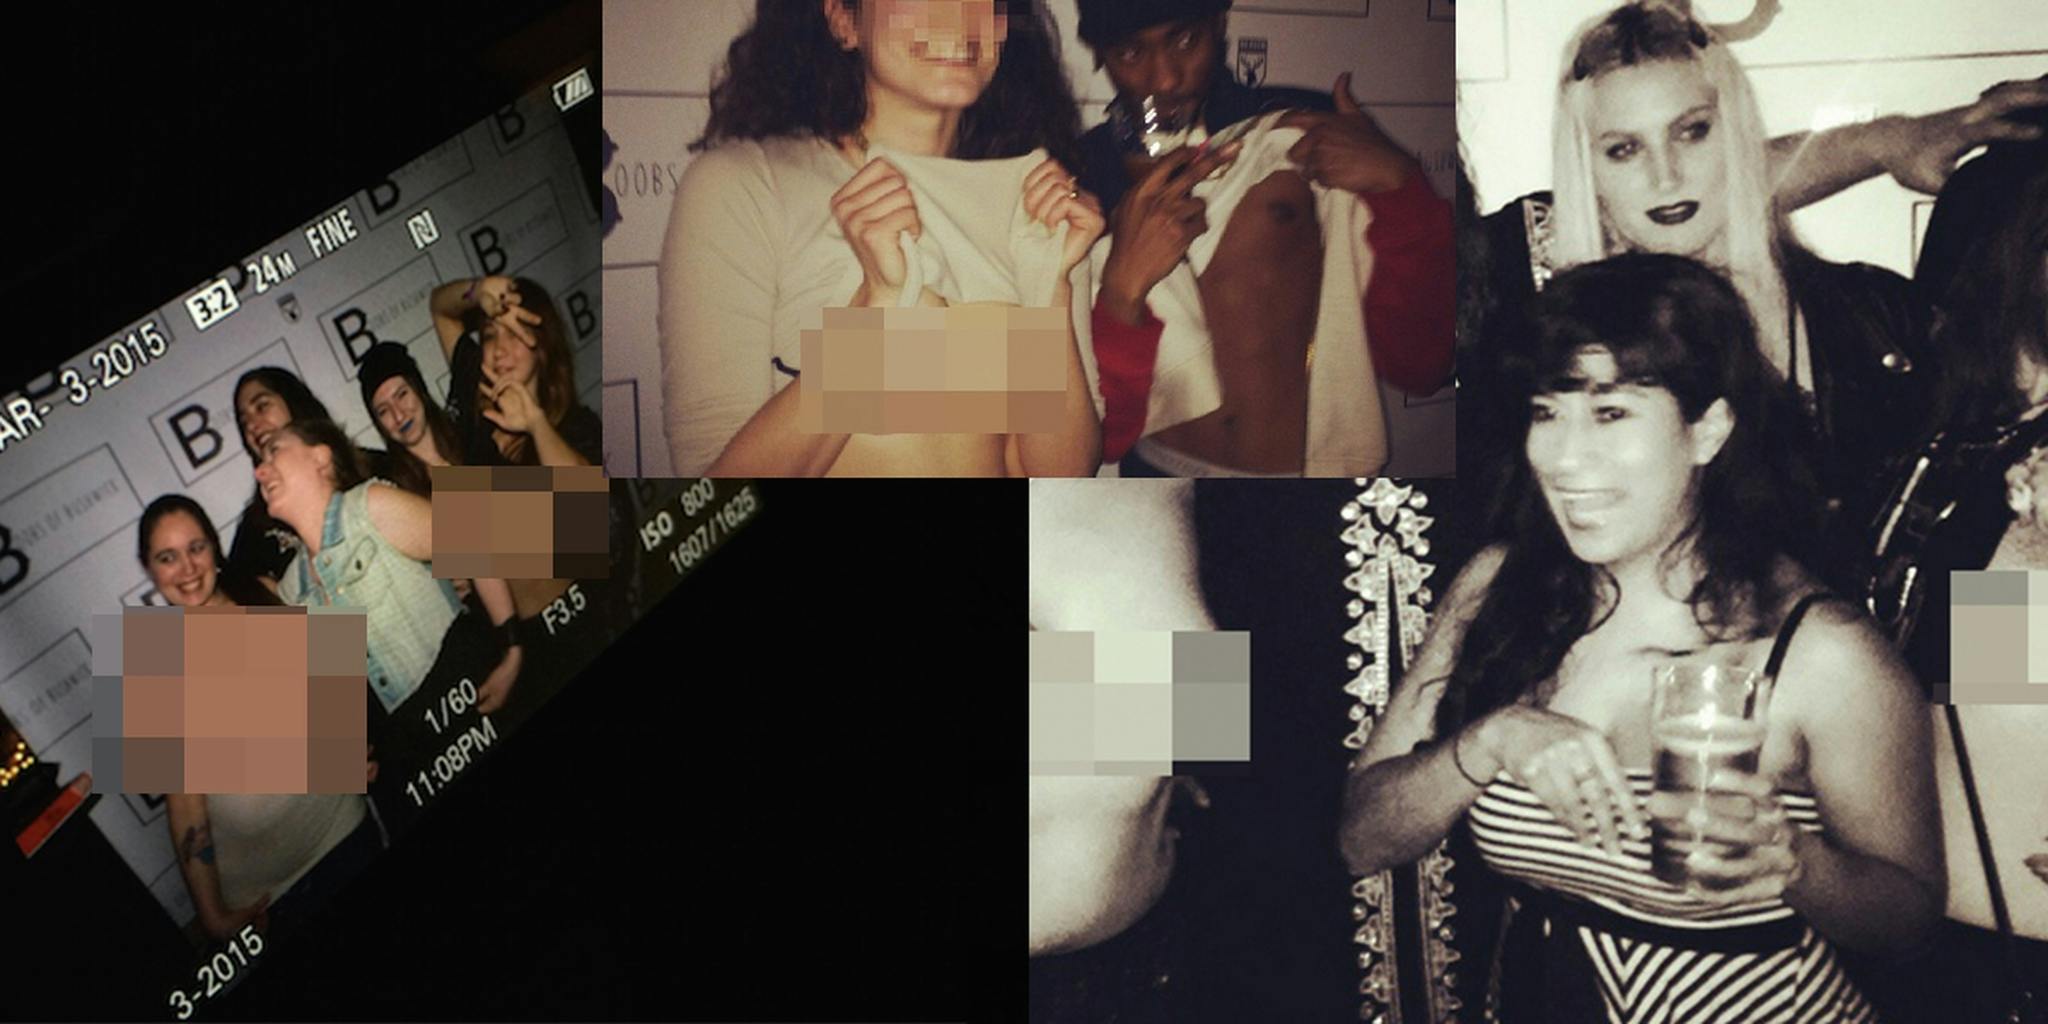 My night at the first annual Boobs of Bushwick topless party